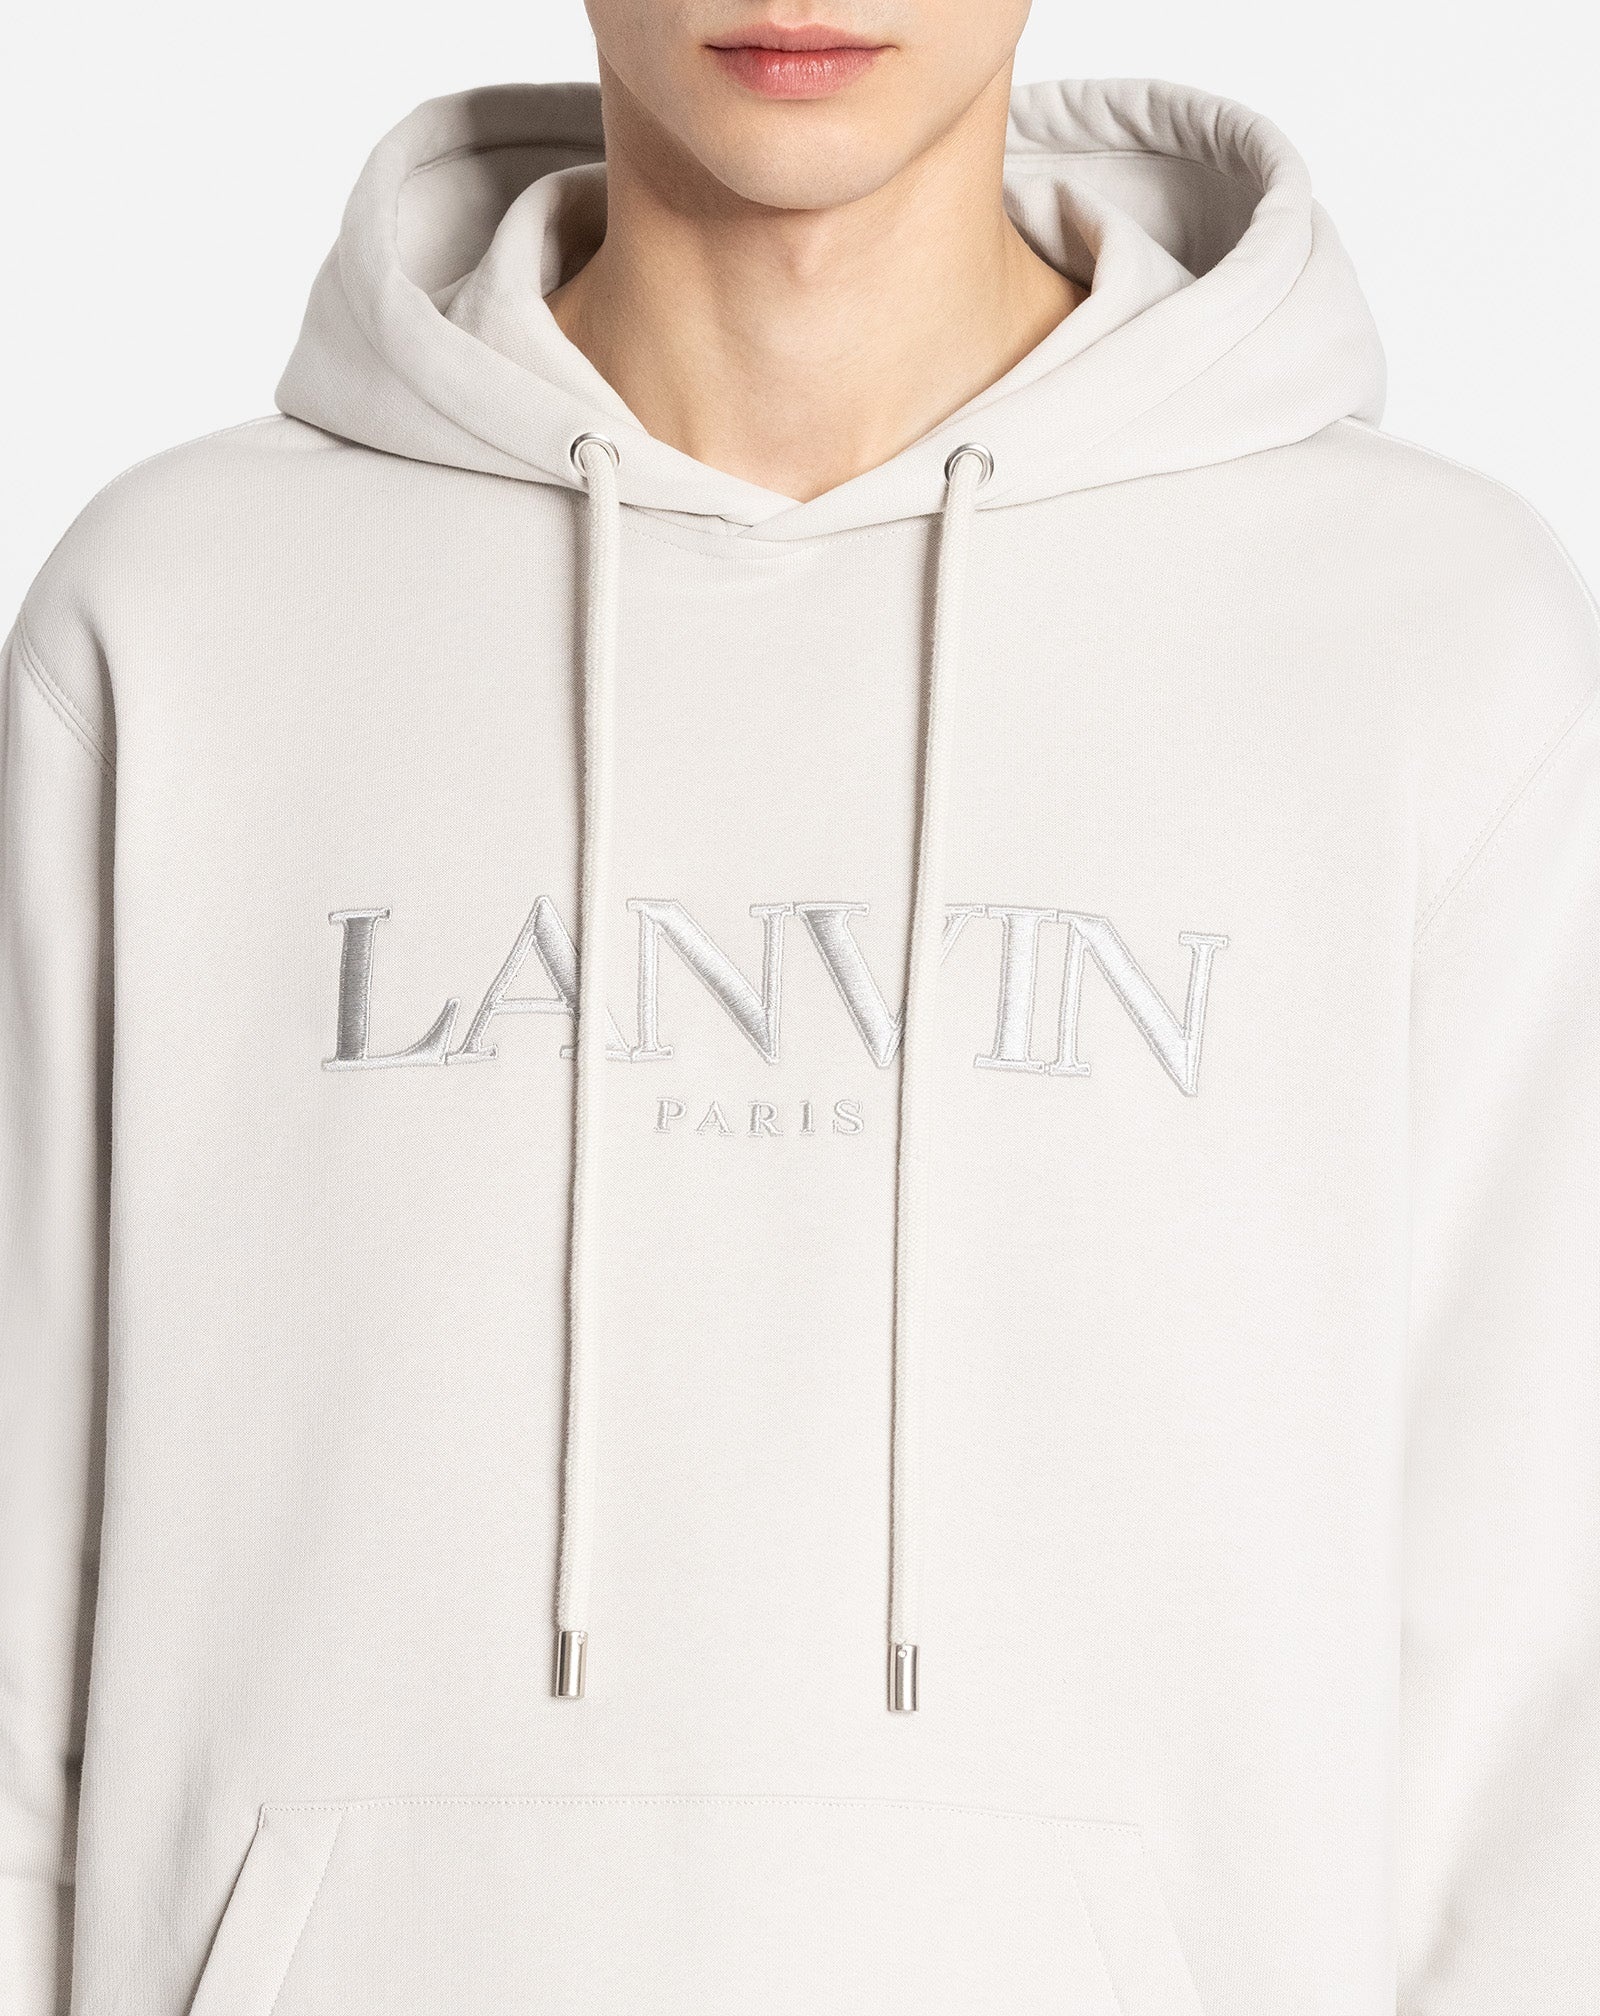 OVERSIZED EMBROIDERED LANVIN PARIS HOODIE - 4